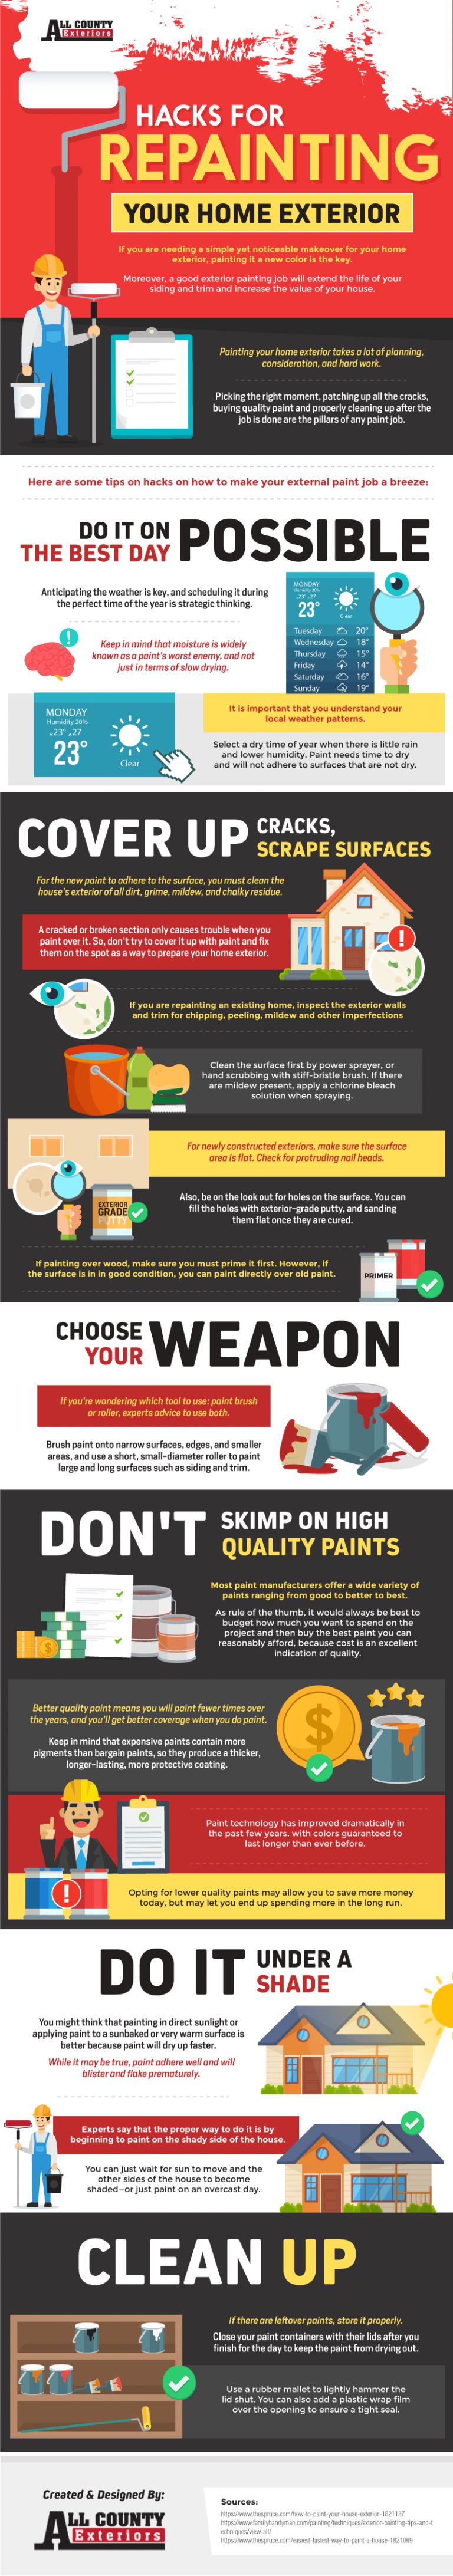 Hacks for Repainting Your Home Exterior (Infographic)